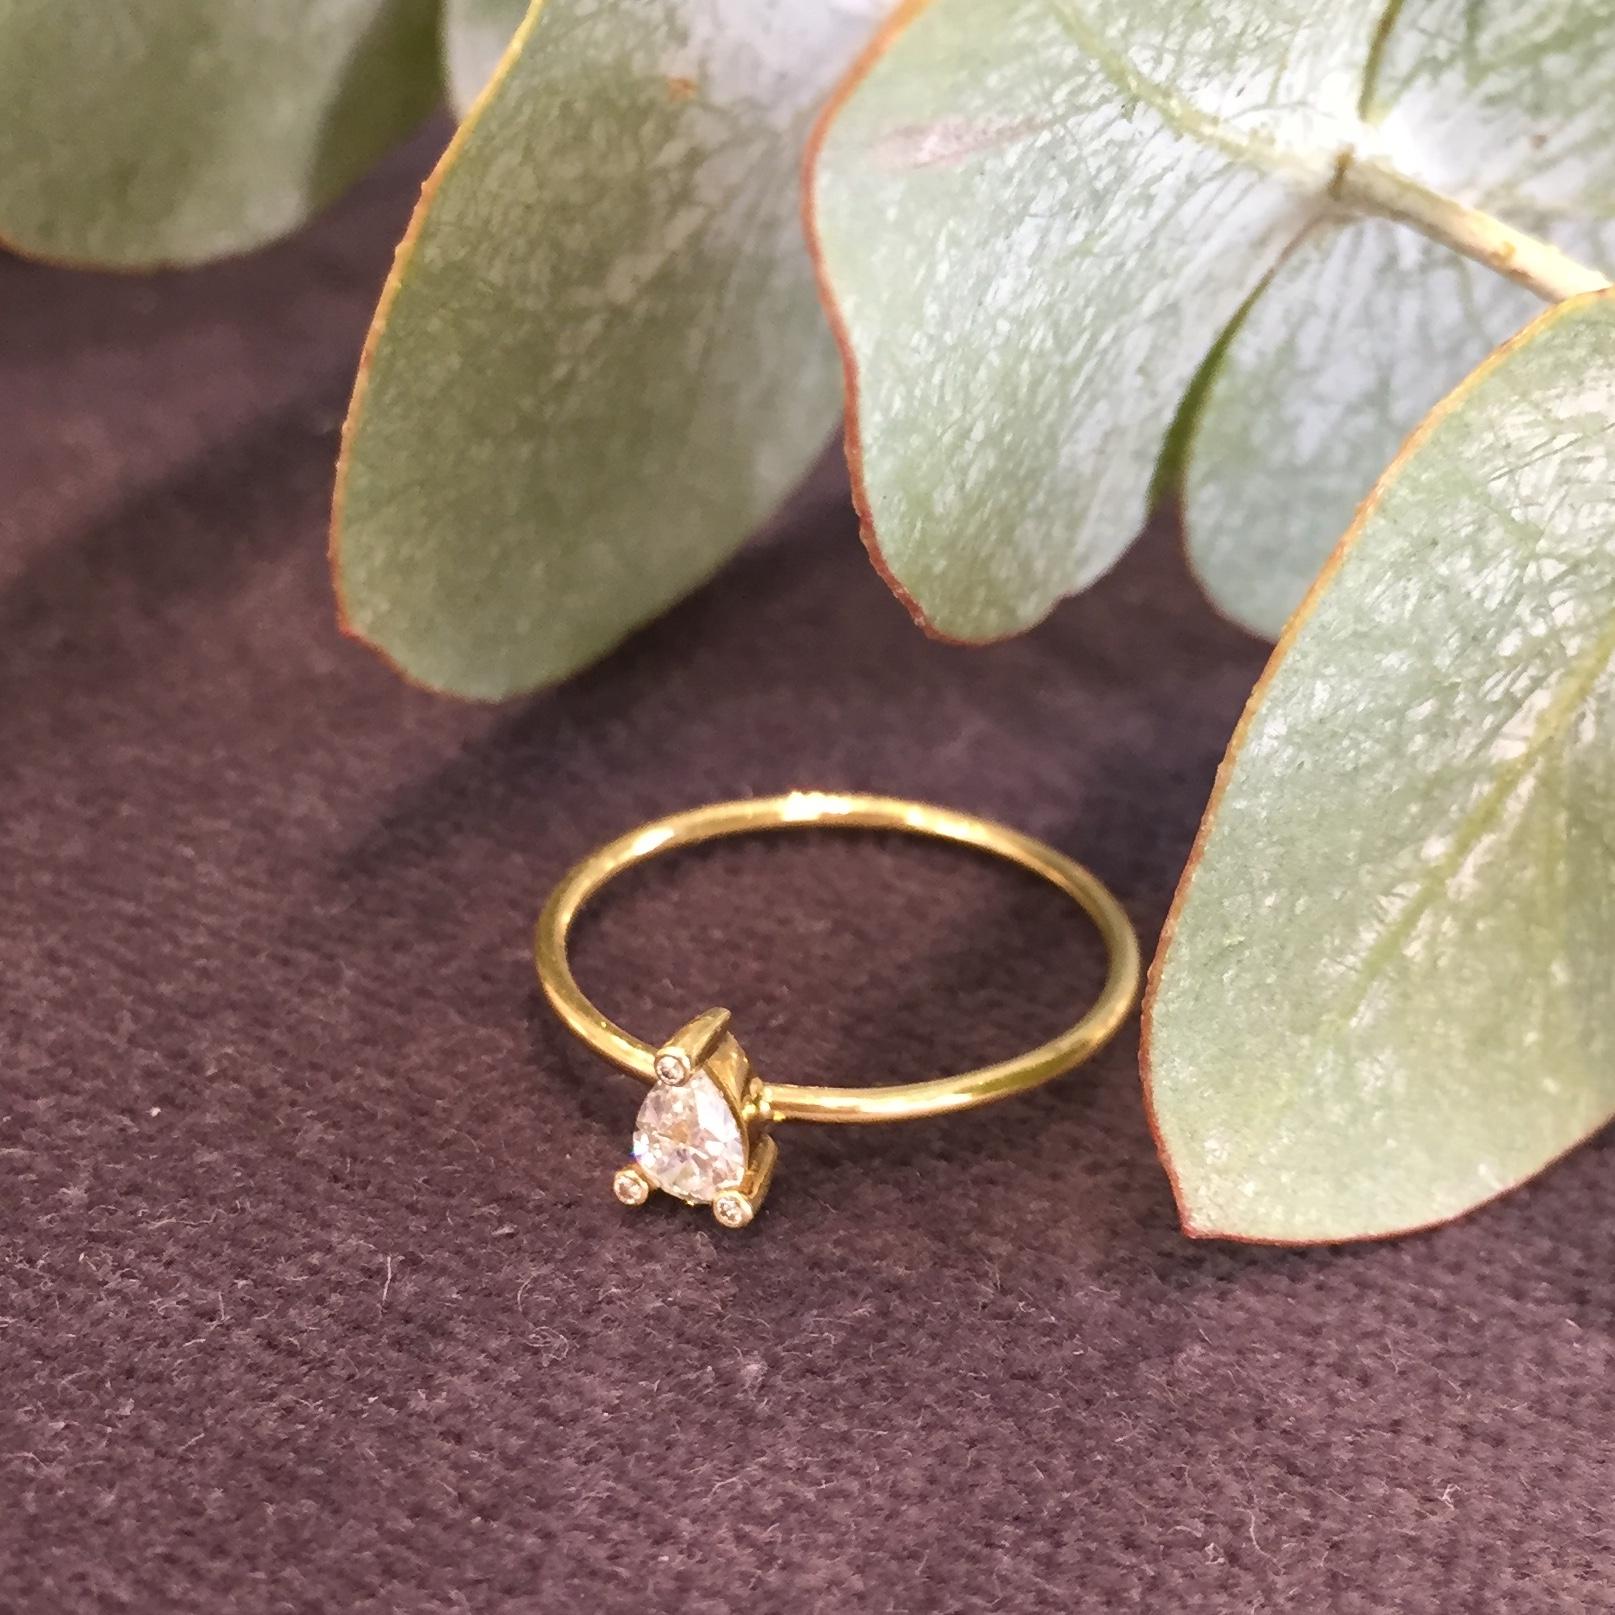 This is a classic engagement ring. Made in 18k yellow gold with a 0.17carat pear shaped white diamond, the diamond tipped claws makes for the perfect twist on a solitaire diamond ring. With it's fine 1mm polished finished band, this ring comes in a